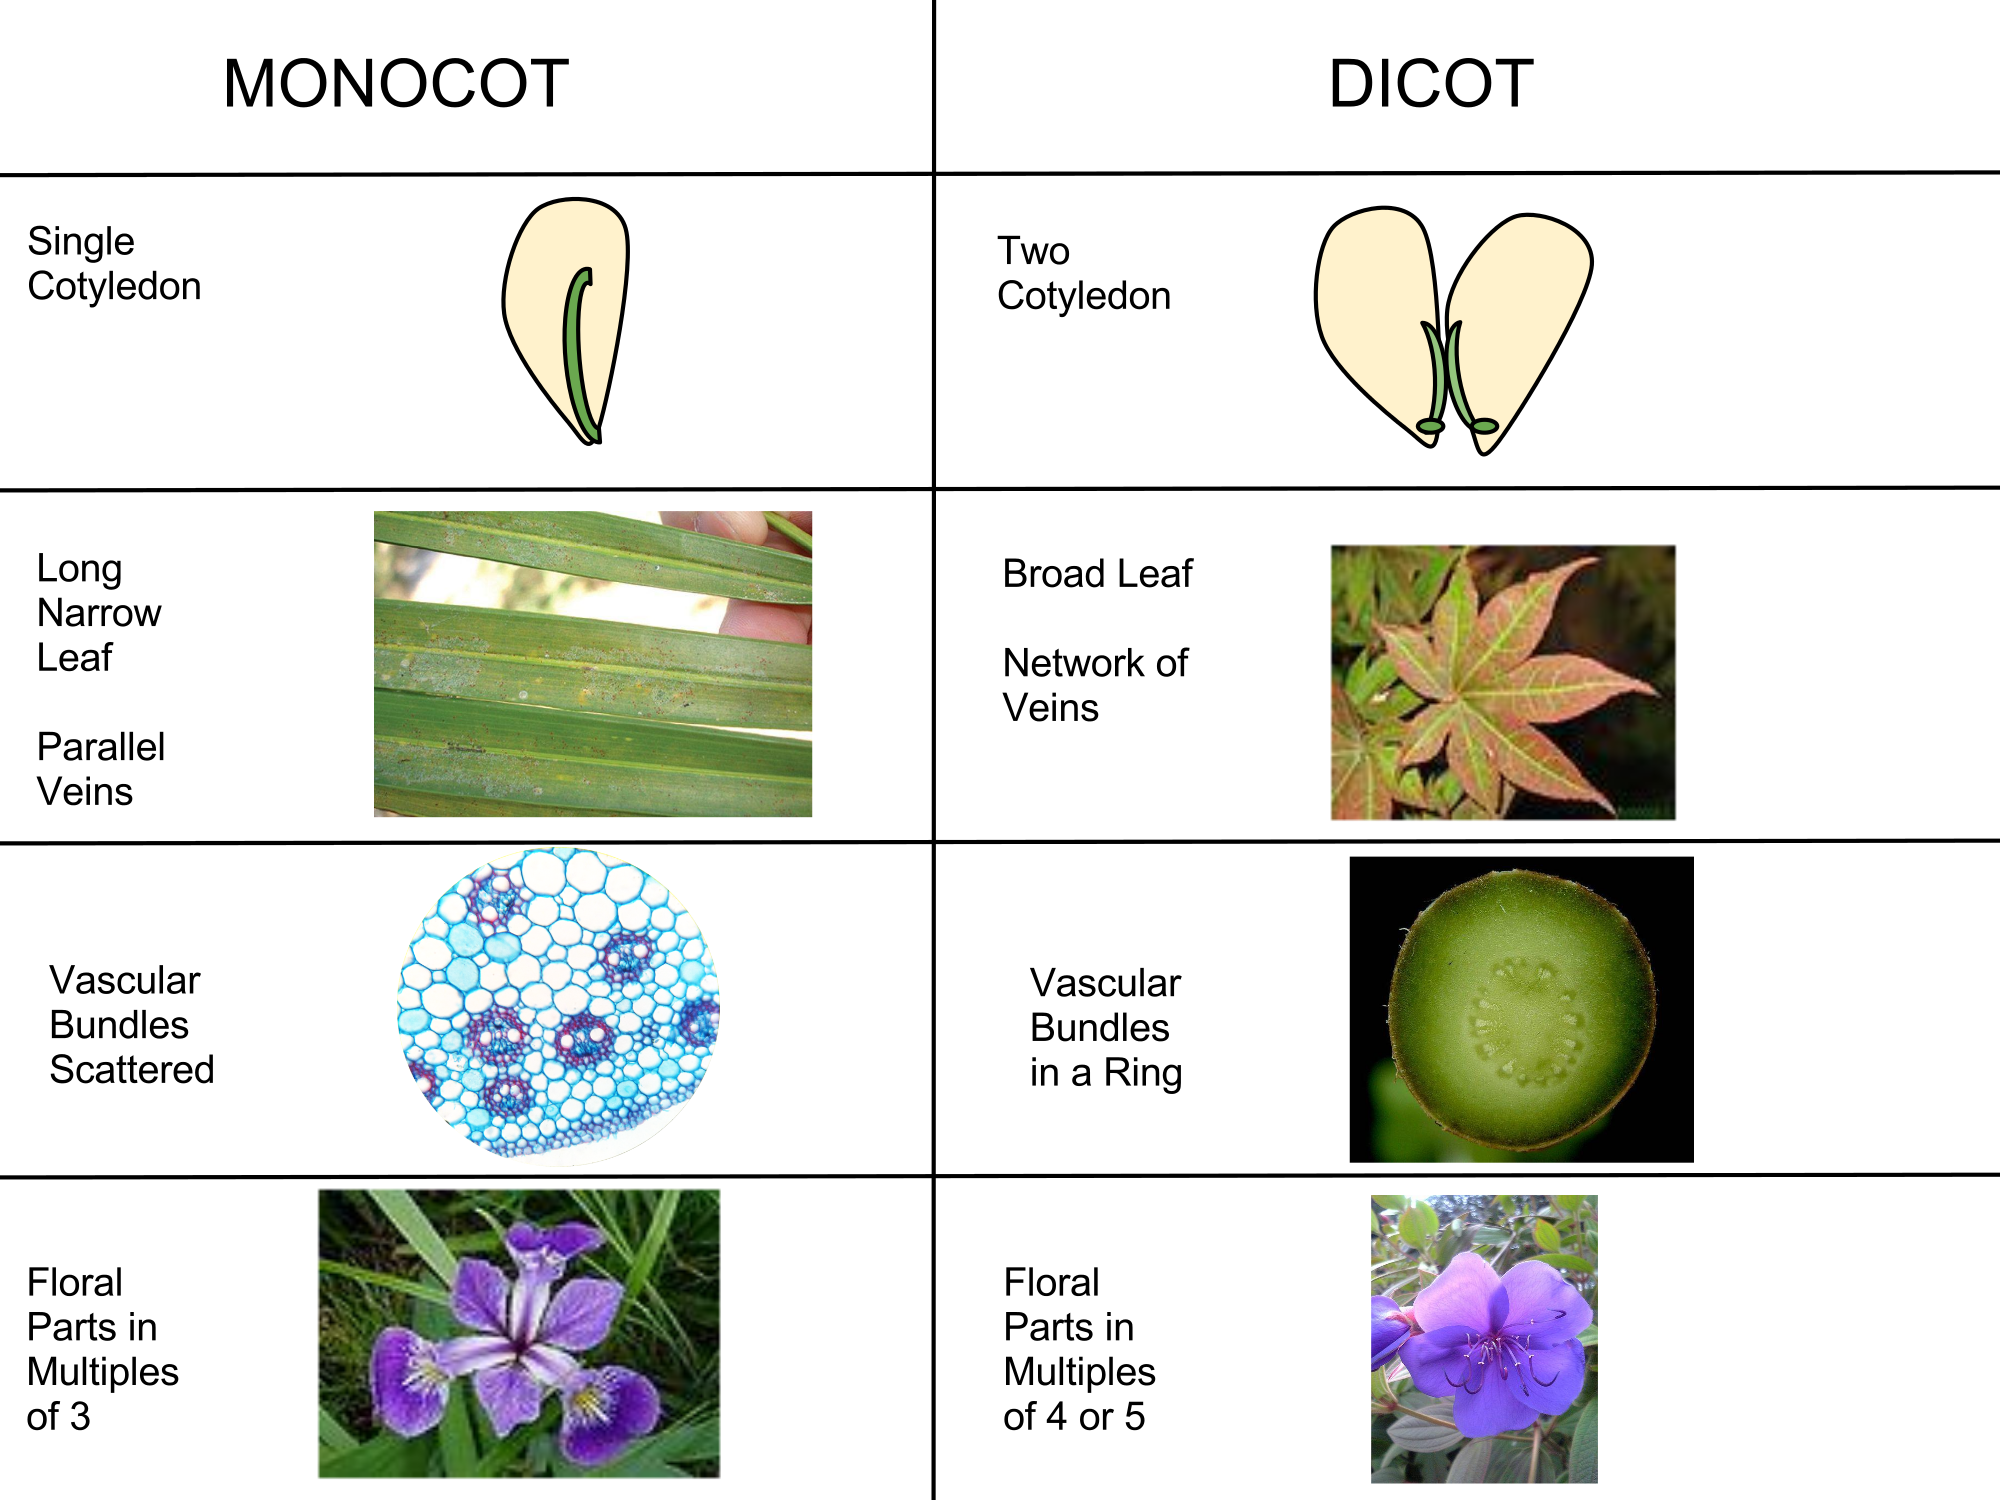     This diagram is showing the differences between monocotyledonous flowers or dicotyledonous flowers. Monocots have a single cotyledon and long and narrow leaves with parallel veins. Their vascular bundles are scattered. Their petals or flower part